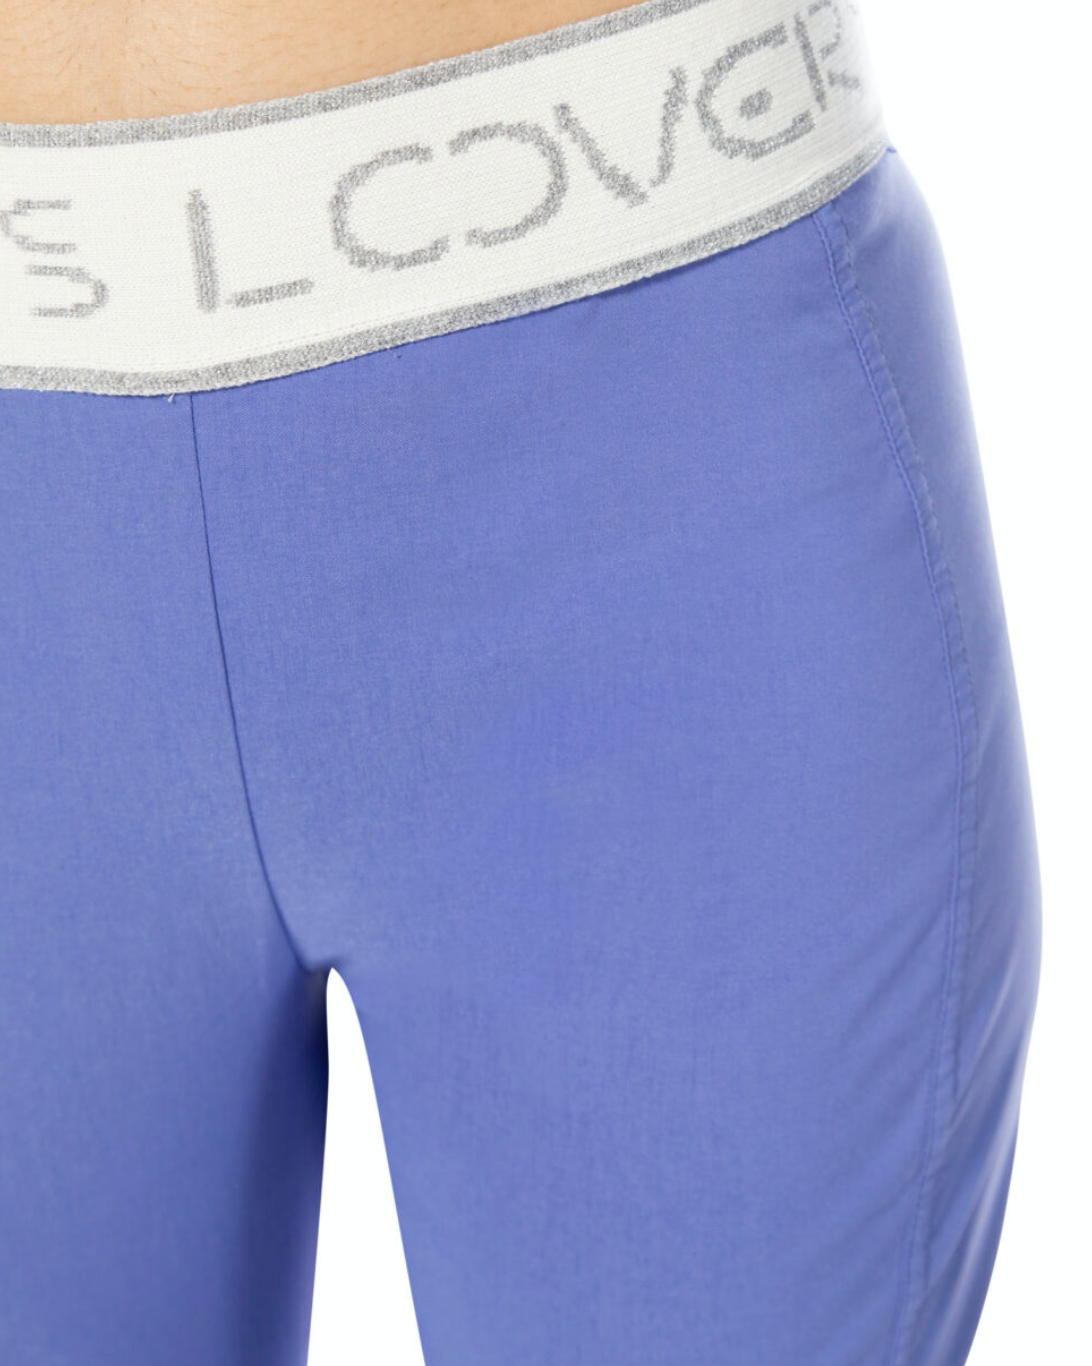 Light Blue Leggings With White Elasticated Waistband & Graphic Detailing